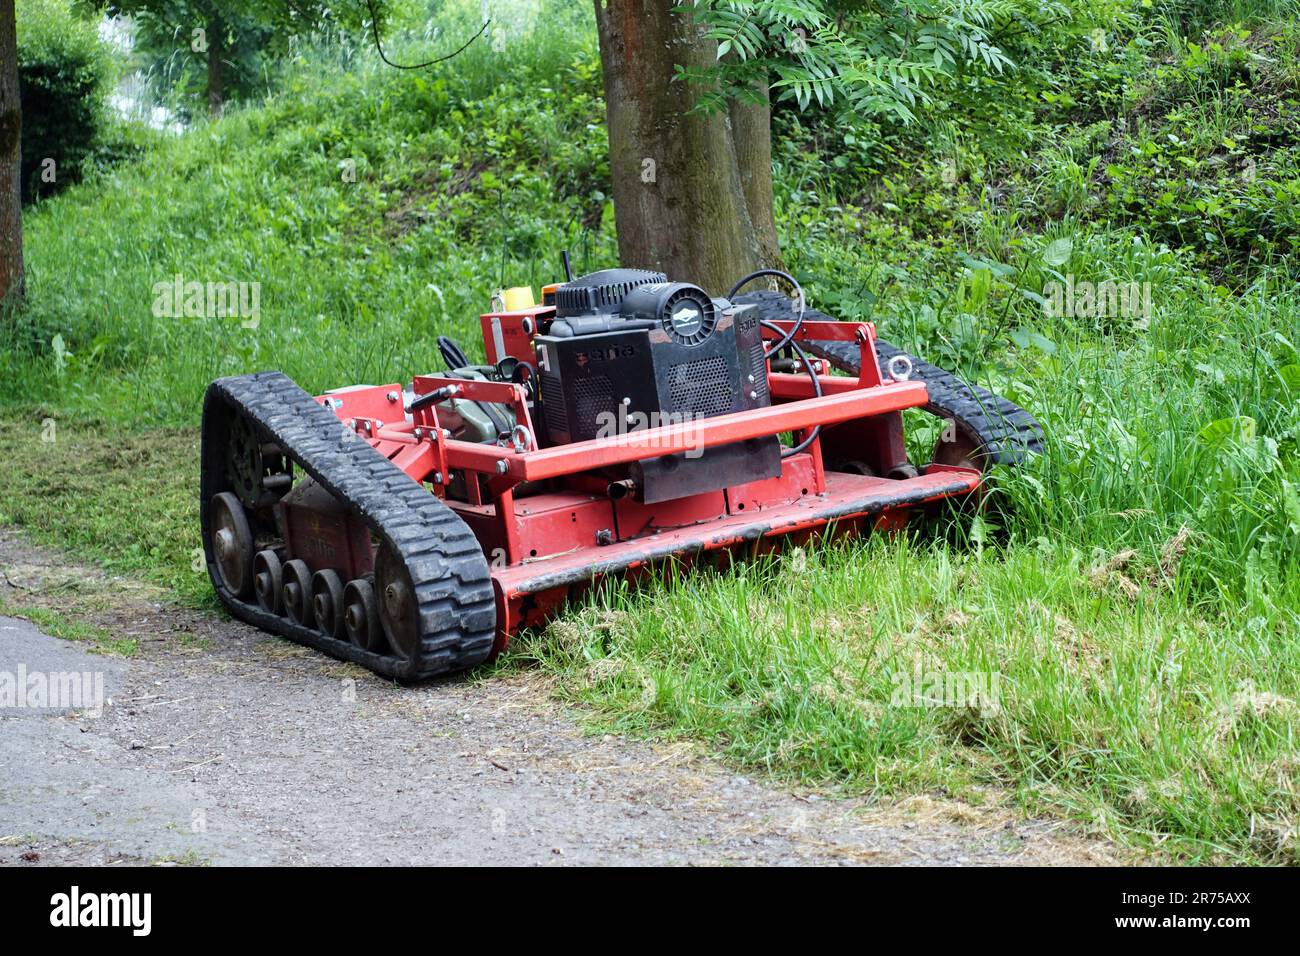 remote controlled caterpillar mower, Germany Stock Photo